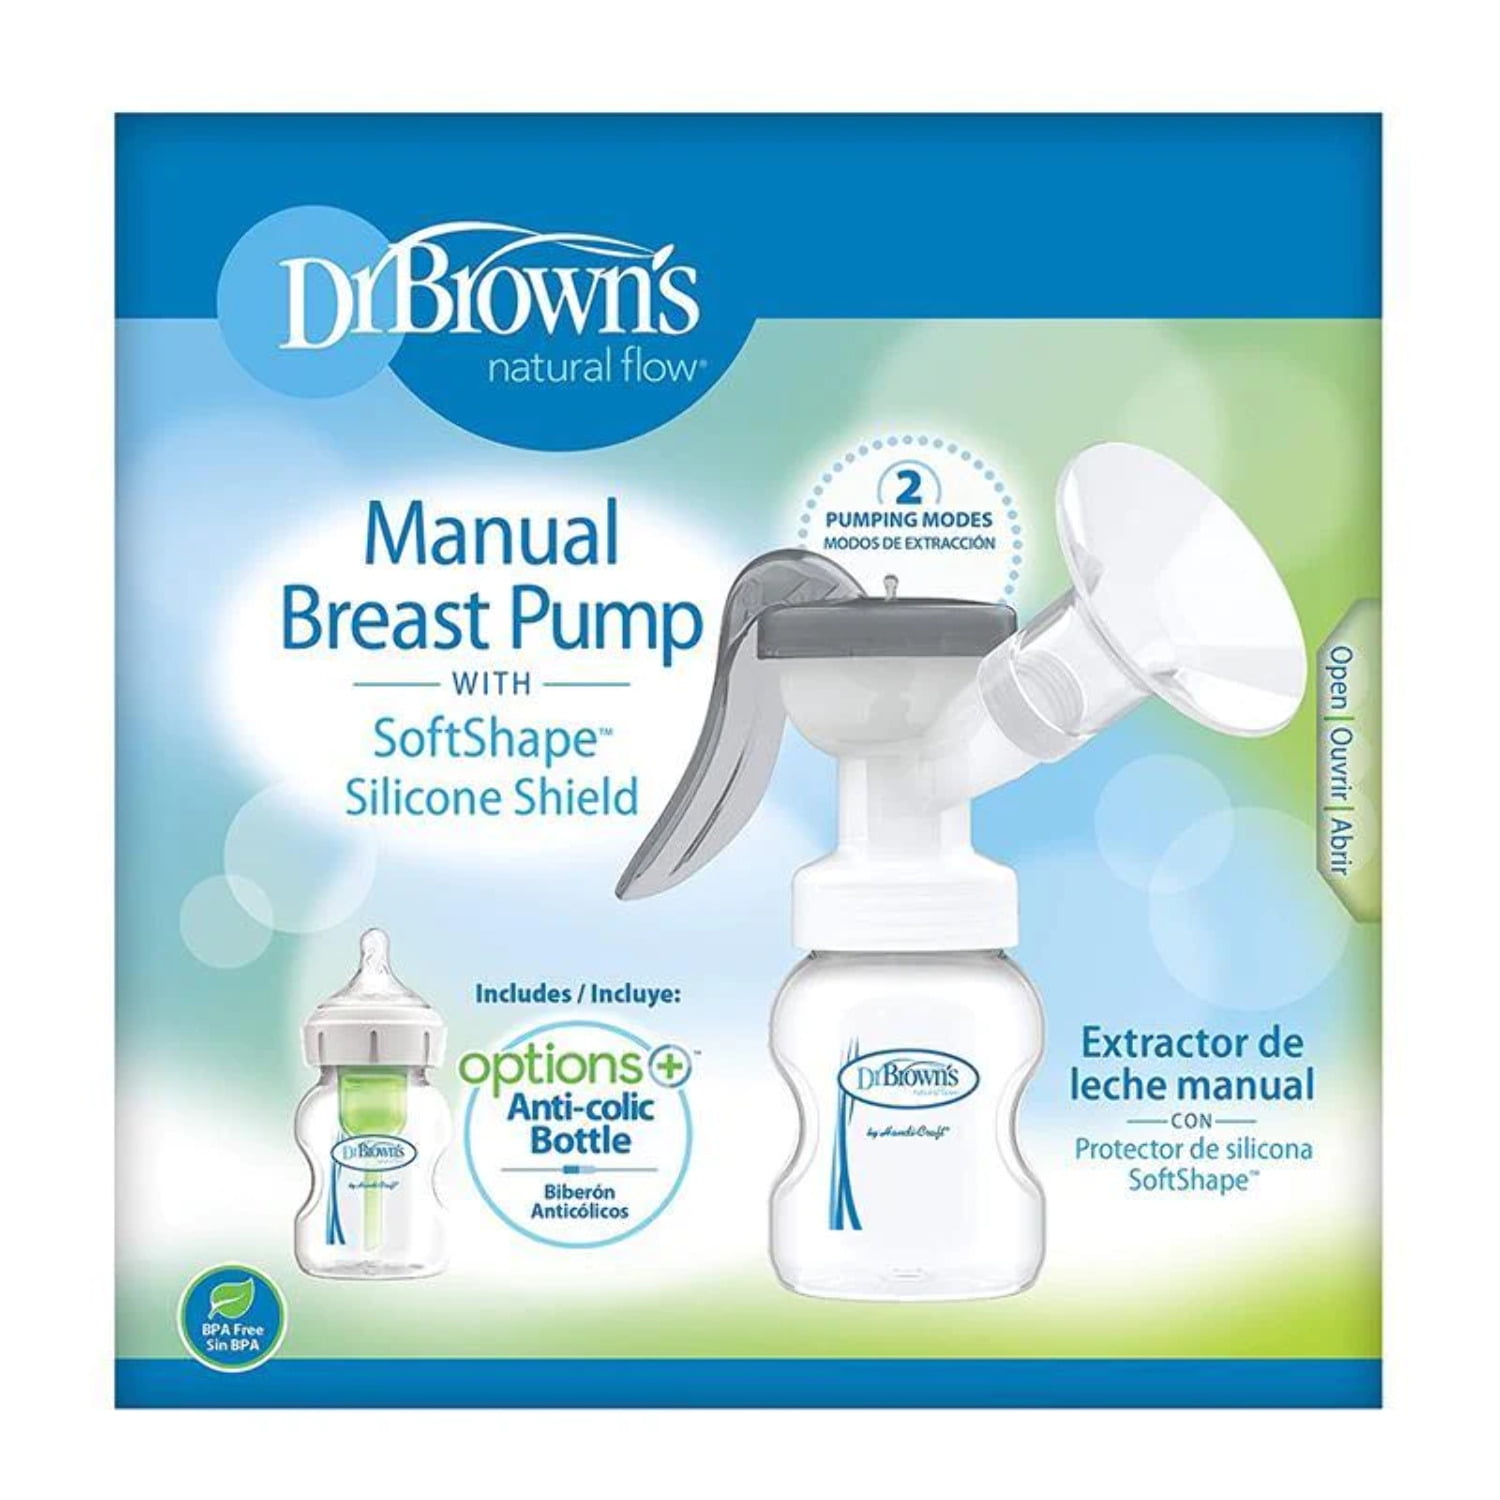 Dr. Browns One-Piece Breast Pump